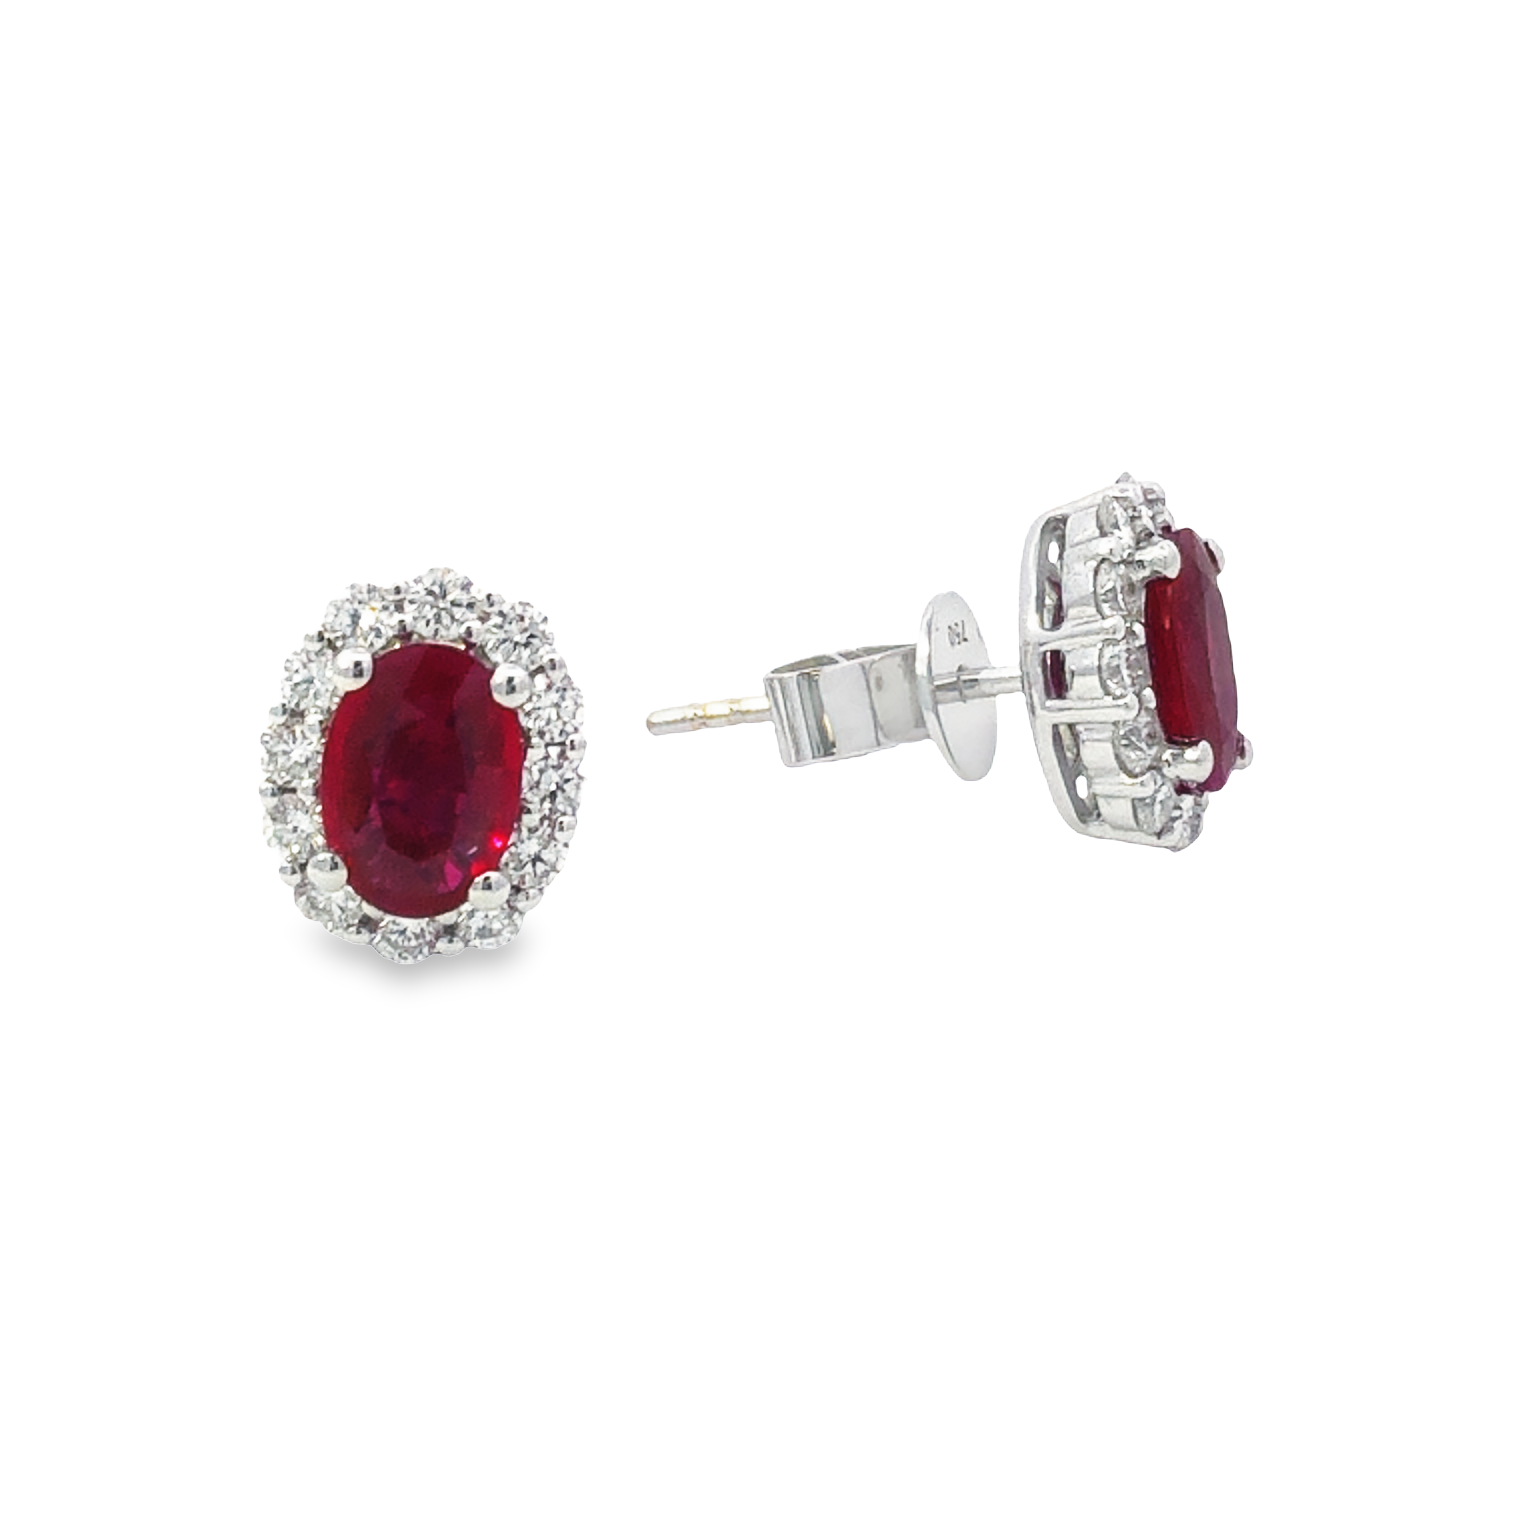 18K White Gold Ruby and Diamond Halo Stud Earrings with 2 Oval Rubies